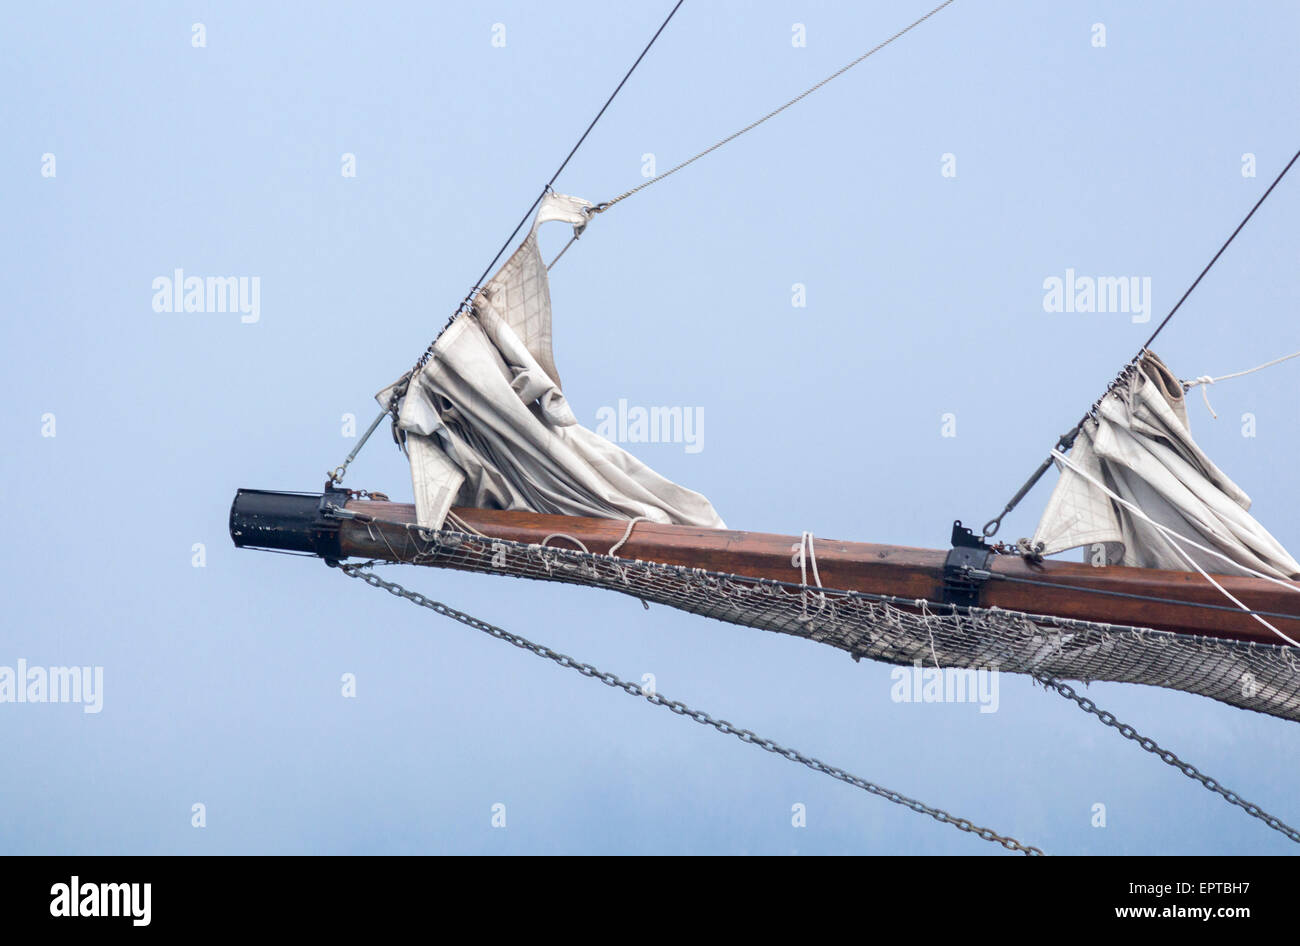 Tall ship mast with sails down against a bright blue sky. Stock Photo